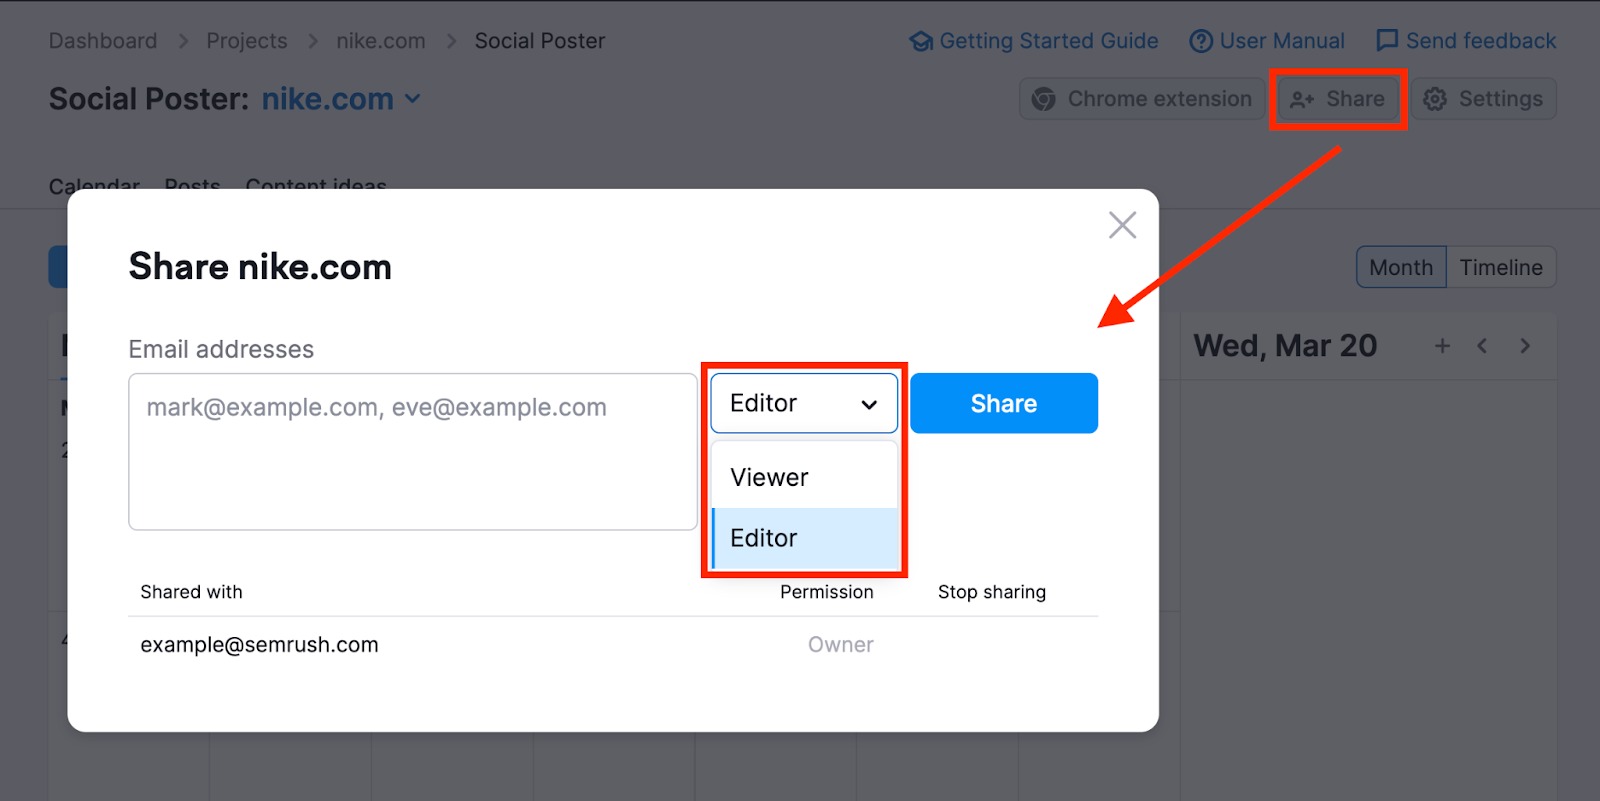 Pop up screen when sharing a project from Social Poster that opens after clicking the Share button. The drop down menu shows viewer and editor options. 